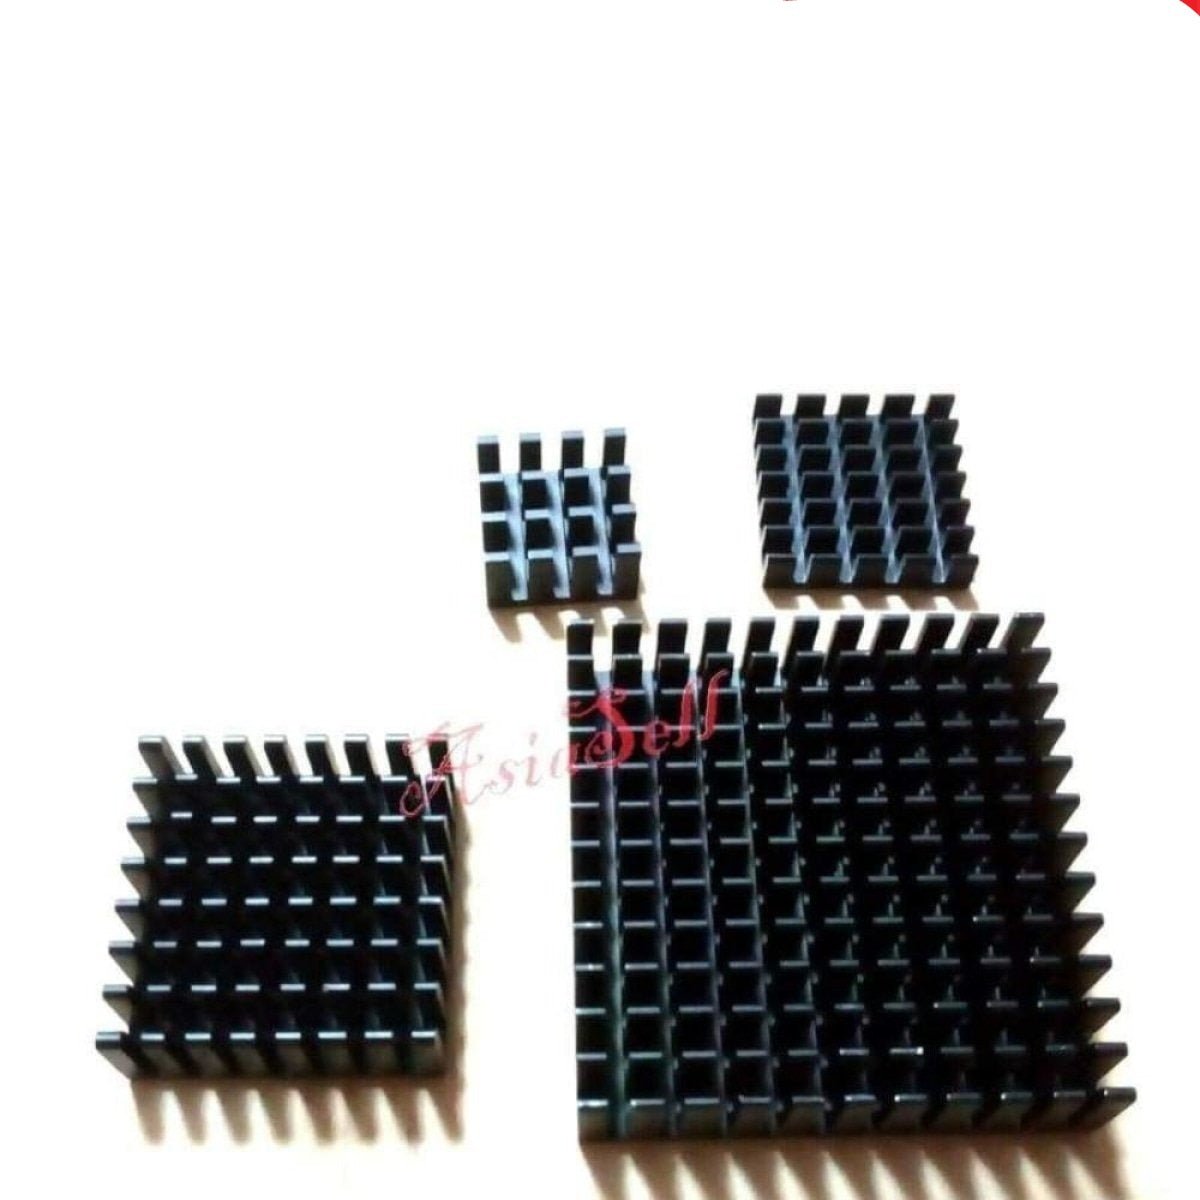 2x Heatsink 50x50x11 40x40x11mm 25x25x10mm 19x19x5mm 14x14x8mm Black Heat Sink - 14x14x8mm (has backing) - - Asia Sell